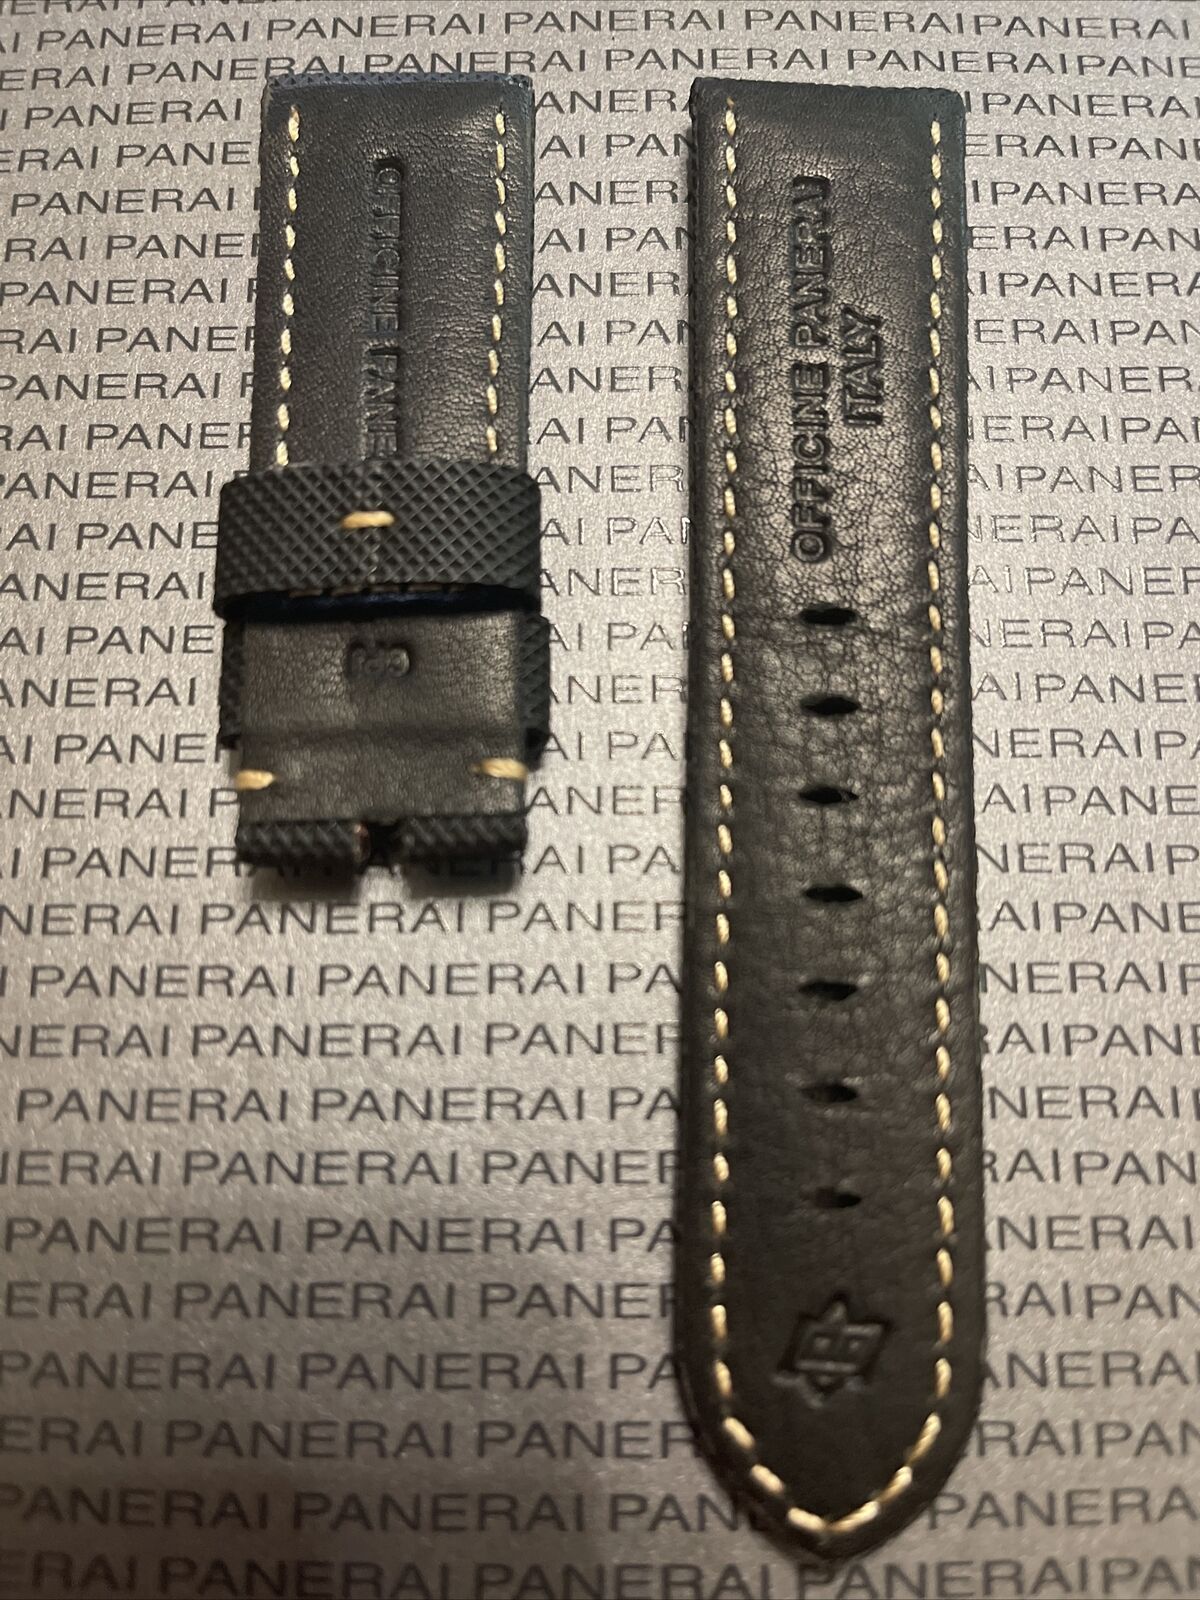 Panerai 24MM Black Canvas with Beige Stitching Tang Strap (24/22MM)